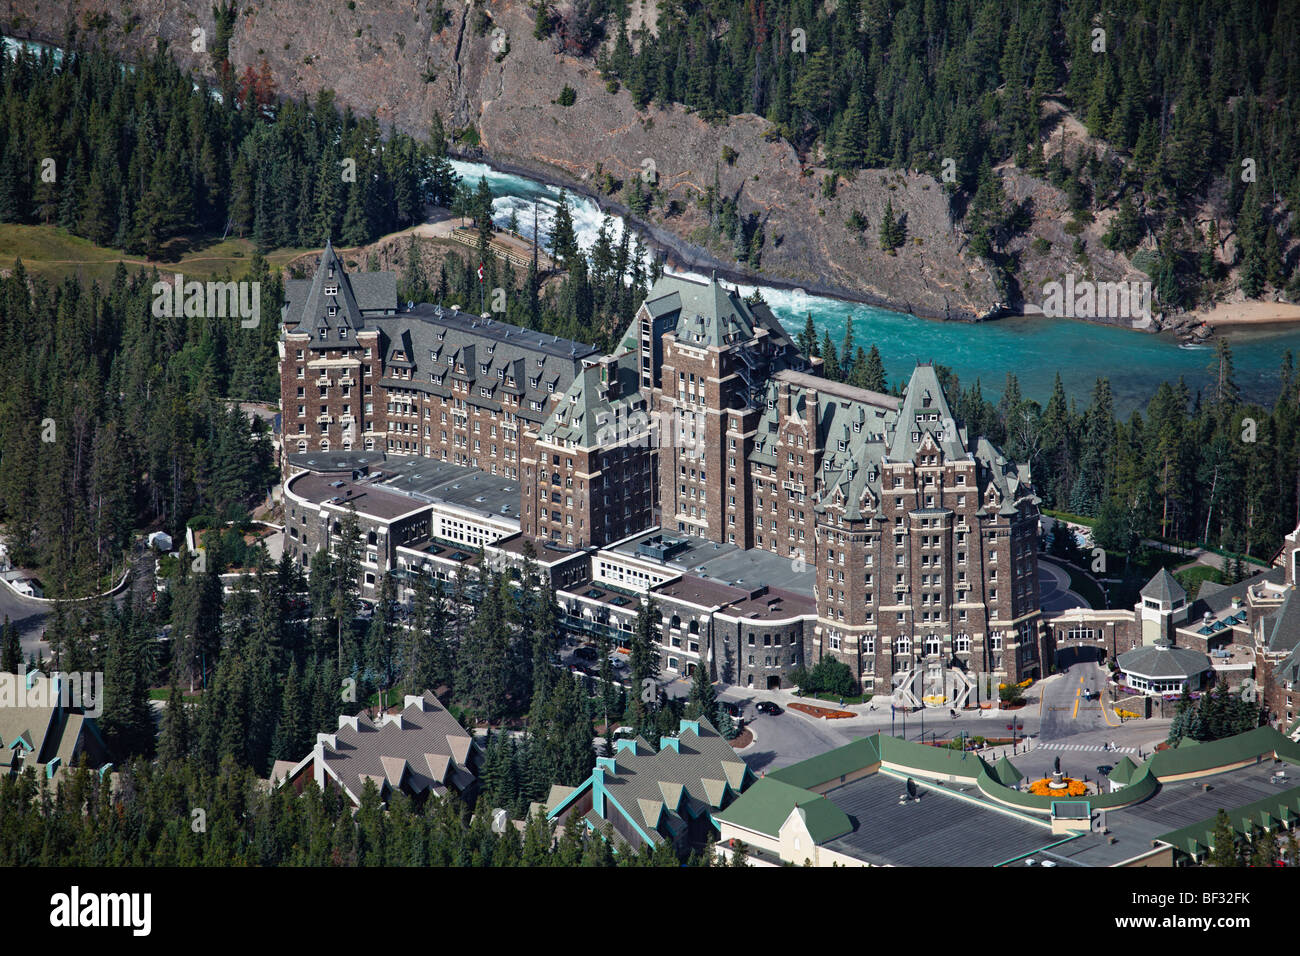 High Angle View of the Fairmont Banff Springs Hotel with the Bow River Falls, Banff, Alberta, Canada Stock Photo